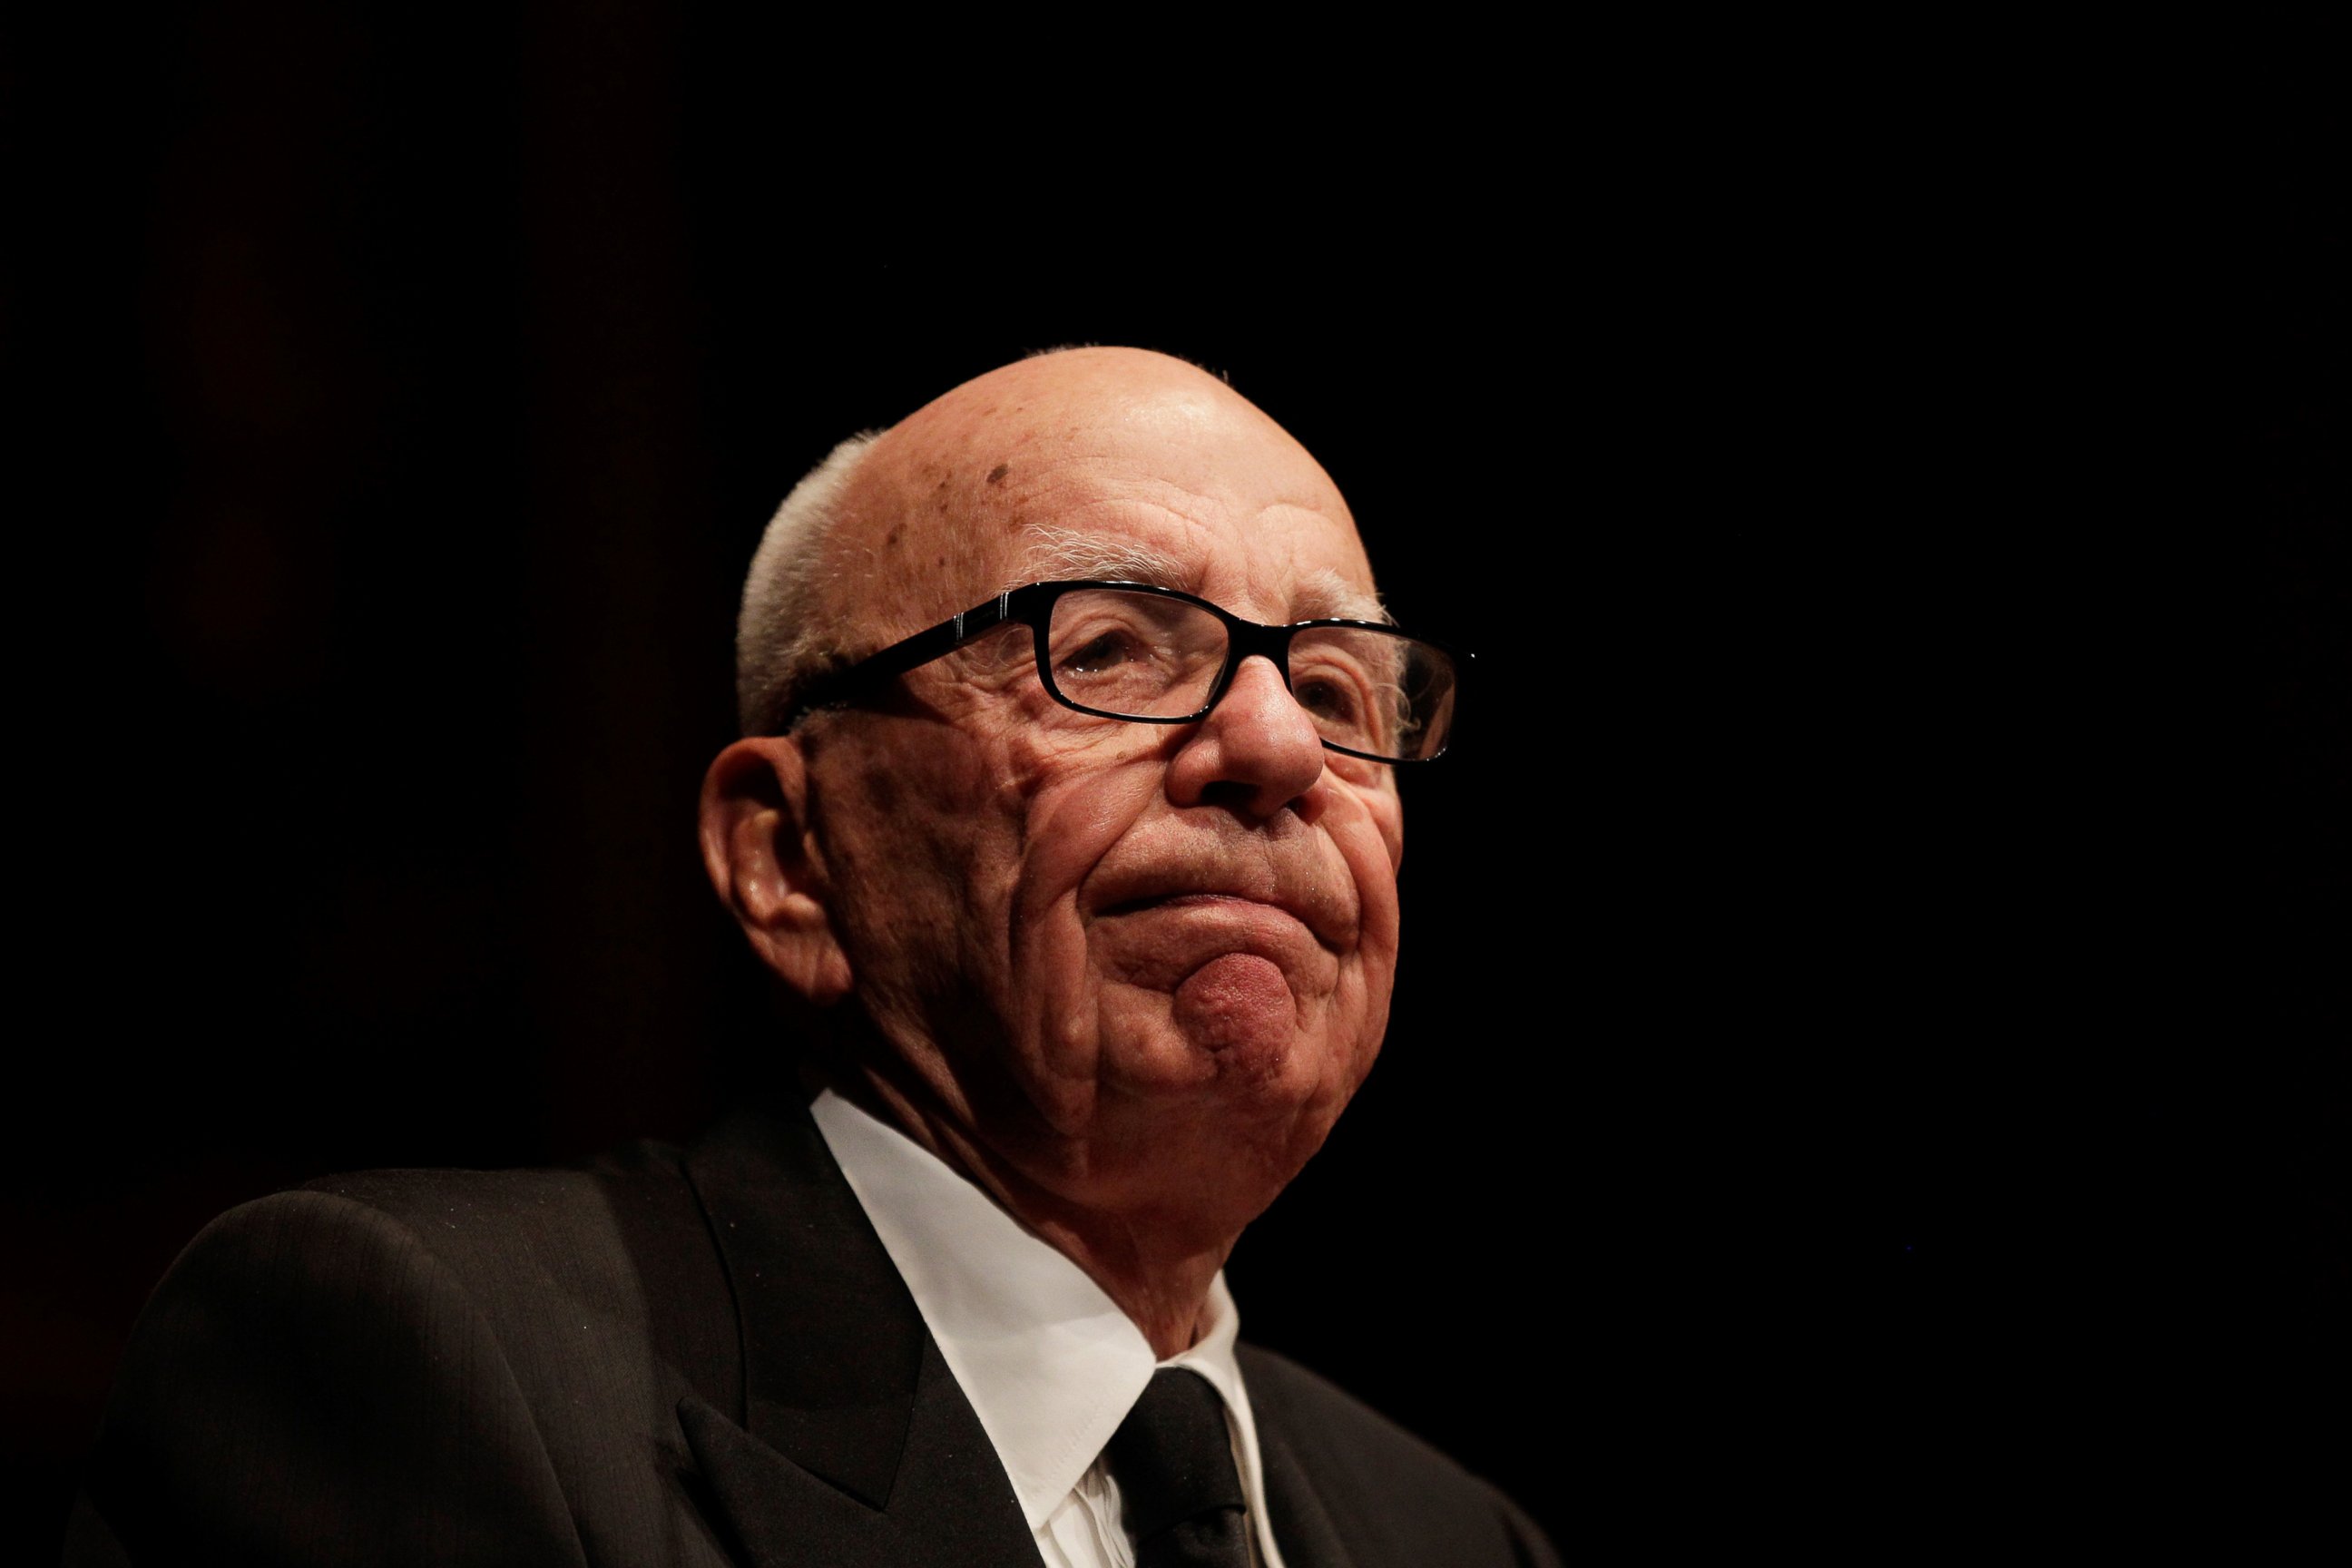 PHOTO: Rupert Murdoch, chairman and chief executive officer of News Corp., pauses during an event hosted by the Lowy Institute for International Policy in Sydney, Australia, on Oct. 31, 2013. 